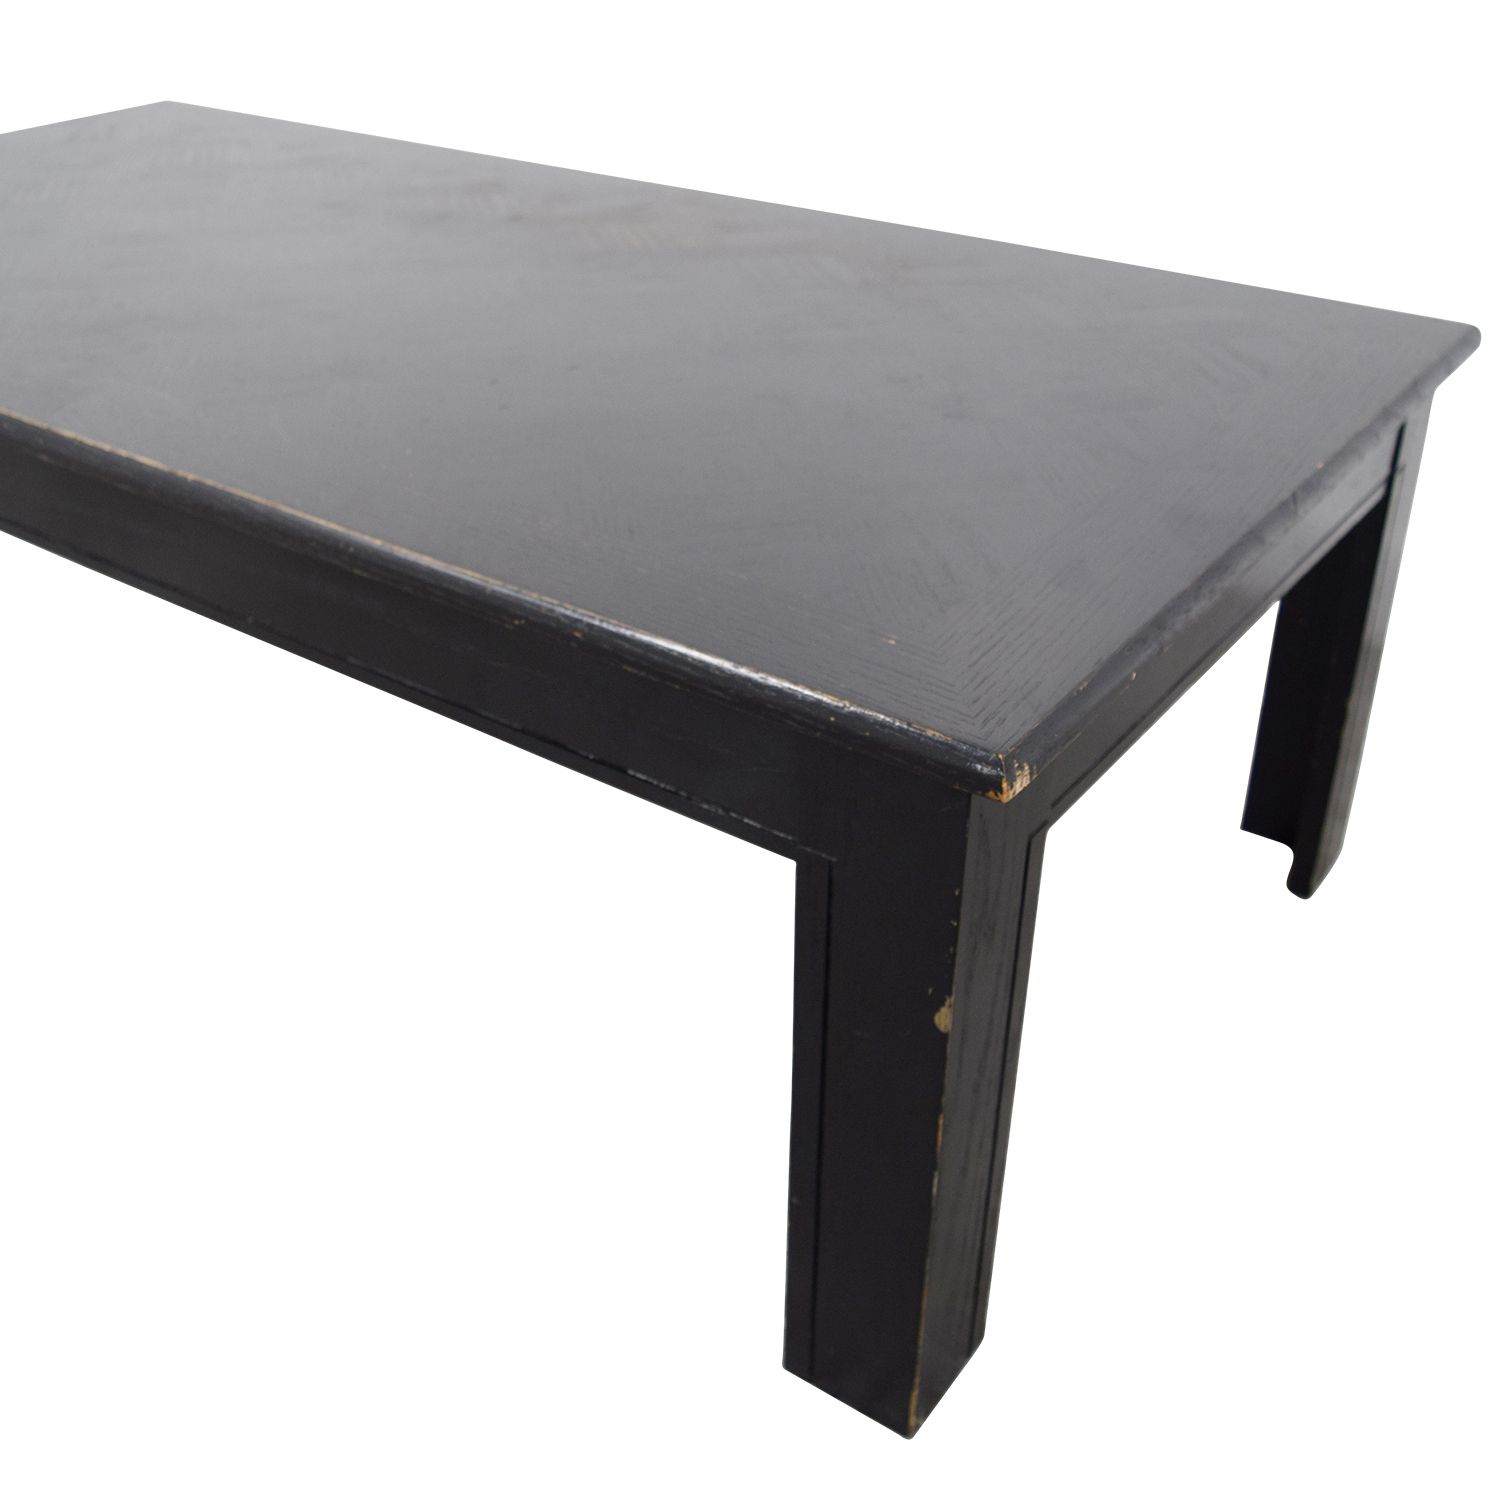 [%well Liked Black And White Coffee Tables Inside 69% Off – Black Rectangular Coffee Table / Tables|69% Off – Black Rectangular Coffee Table / Tables Inside Famous Black And White Coffee Tables%] (View 11 of 20)